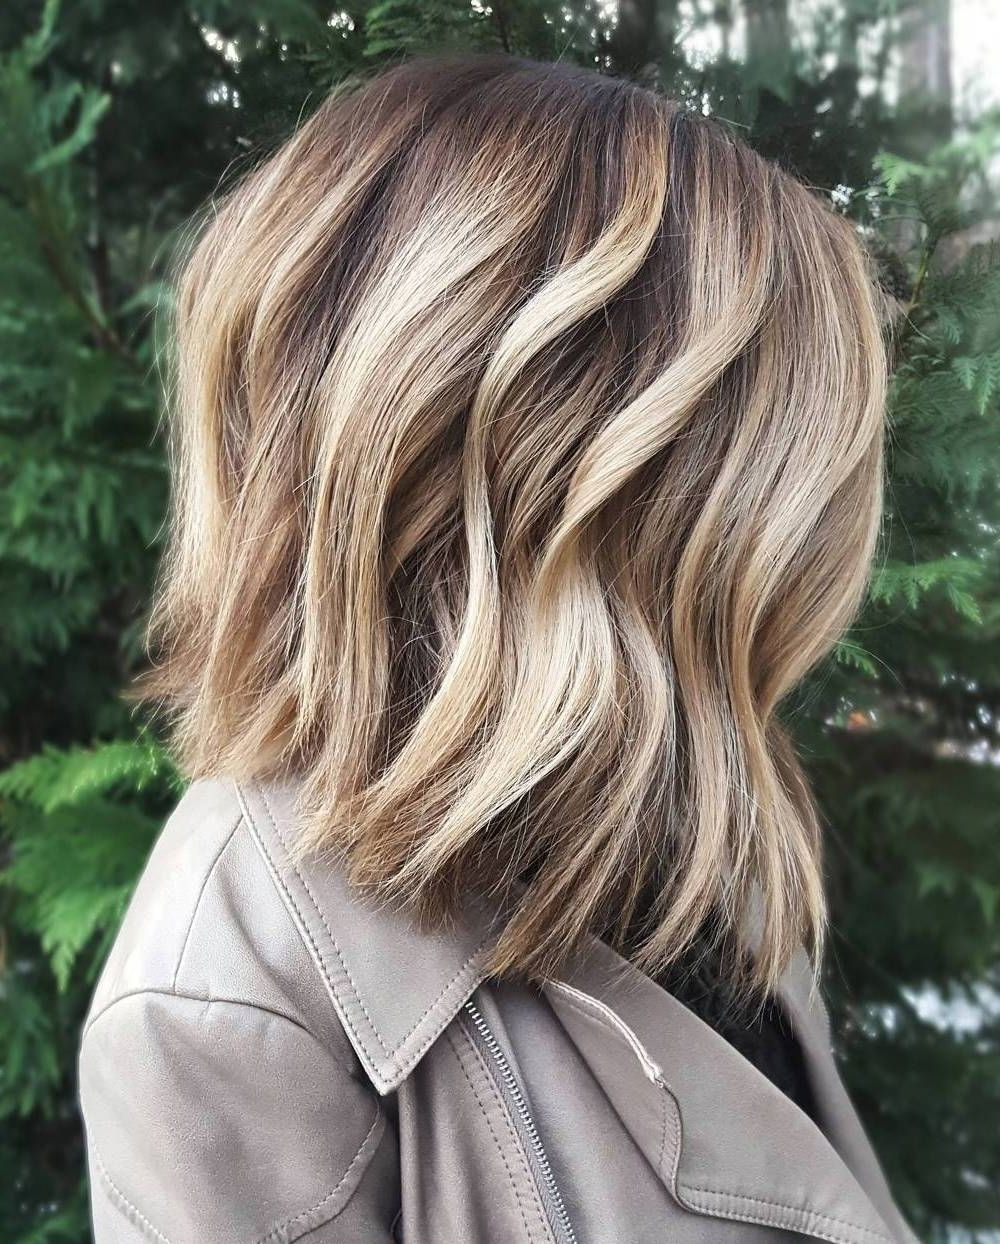 20 Dirty Blonde Hair Ideas That Work On Everyone For Newest Icy Waves And Angled Blonde Hairstyles (View 10 of 20)